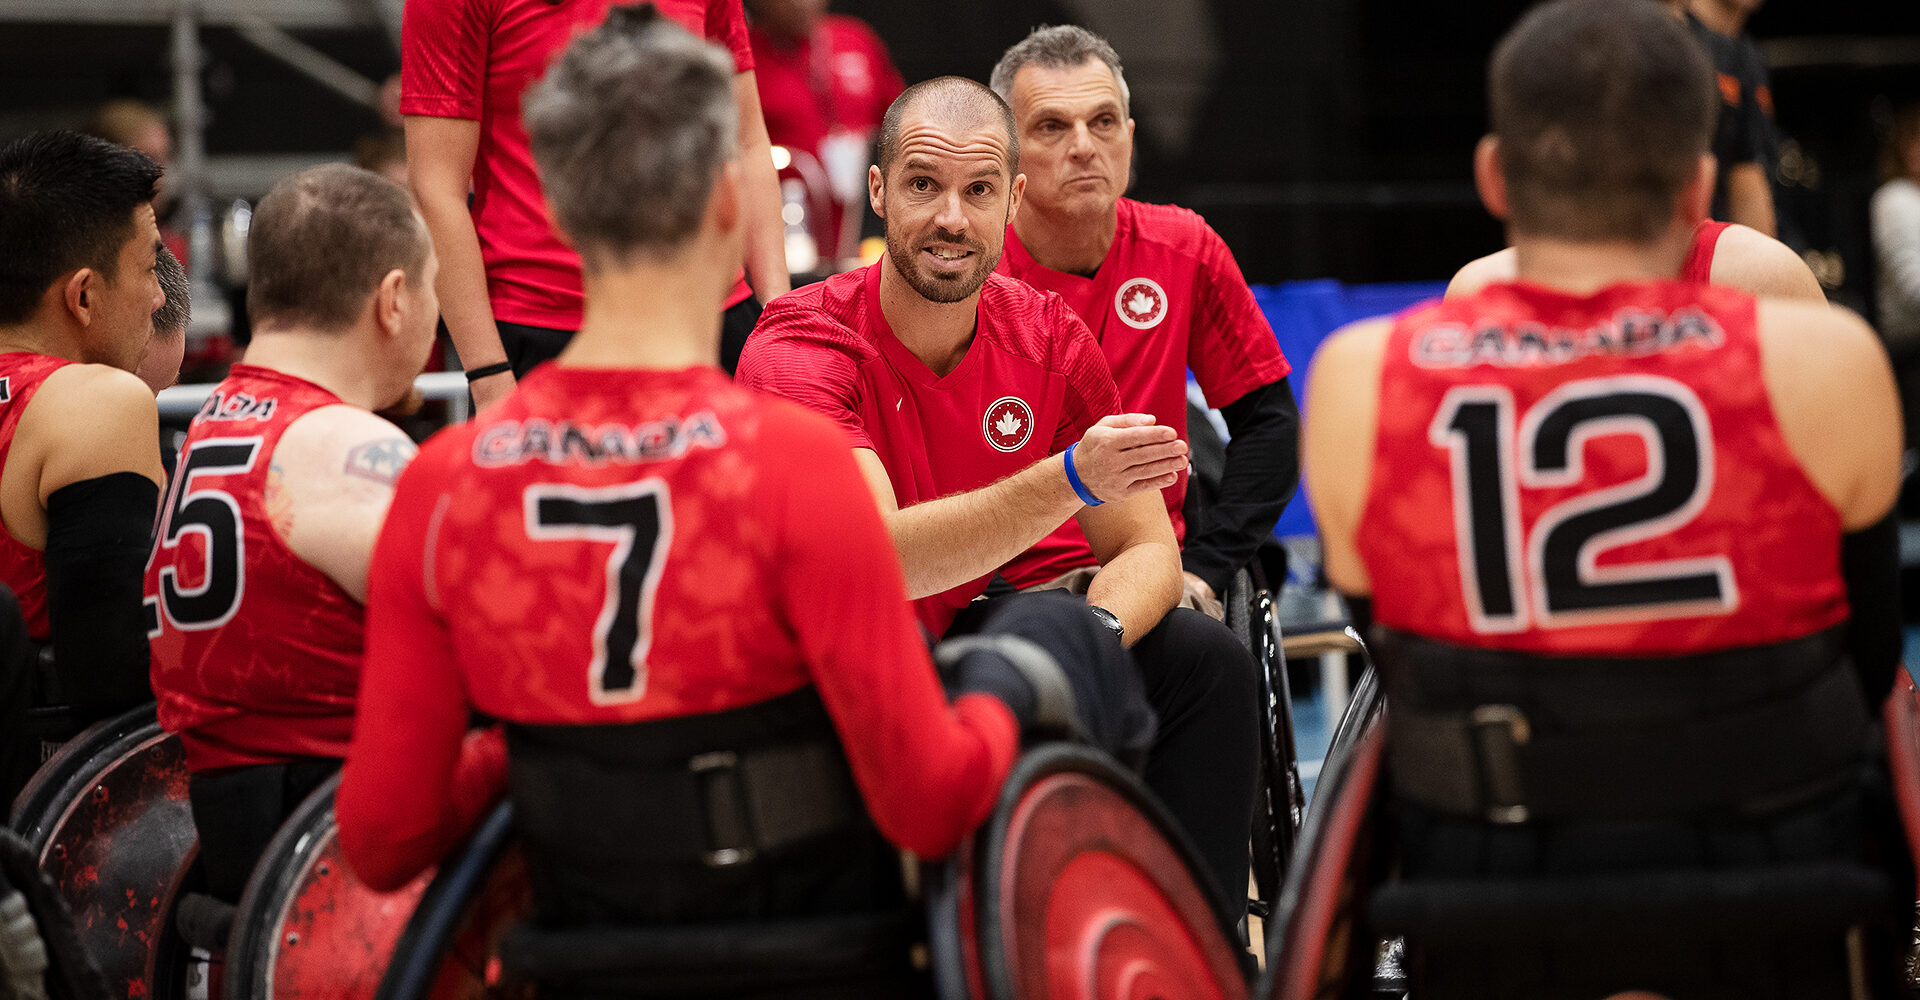 Canada drops opener at 2022 Wheelchair Rugby World Championship